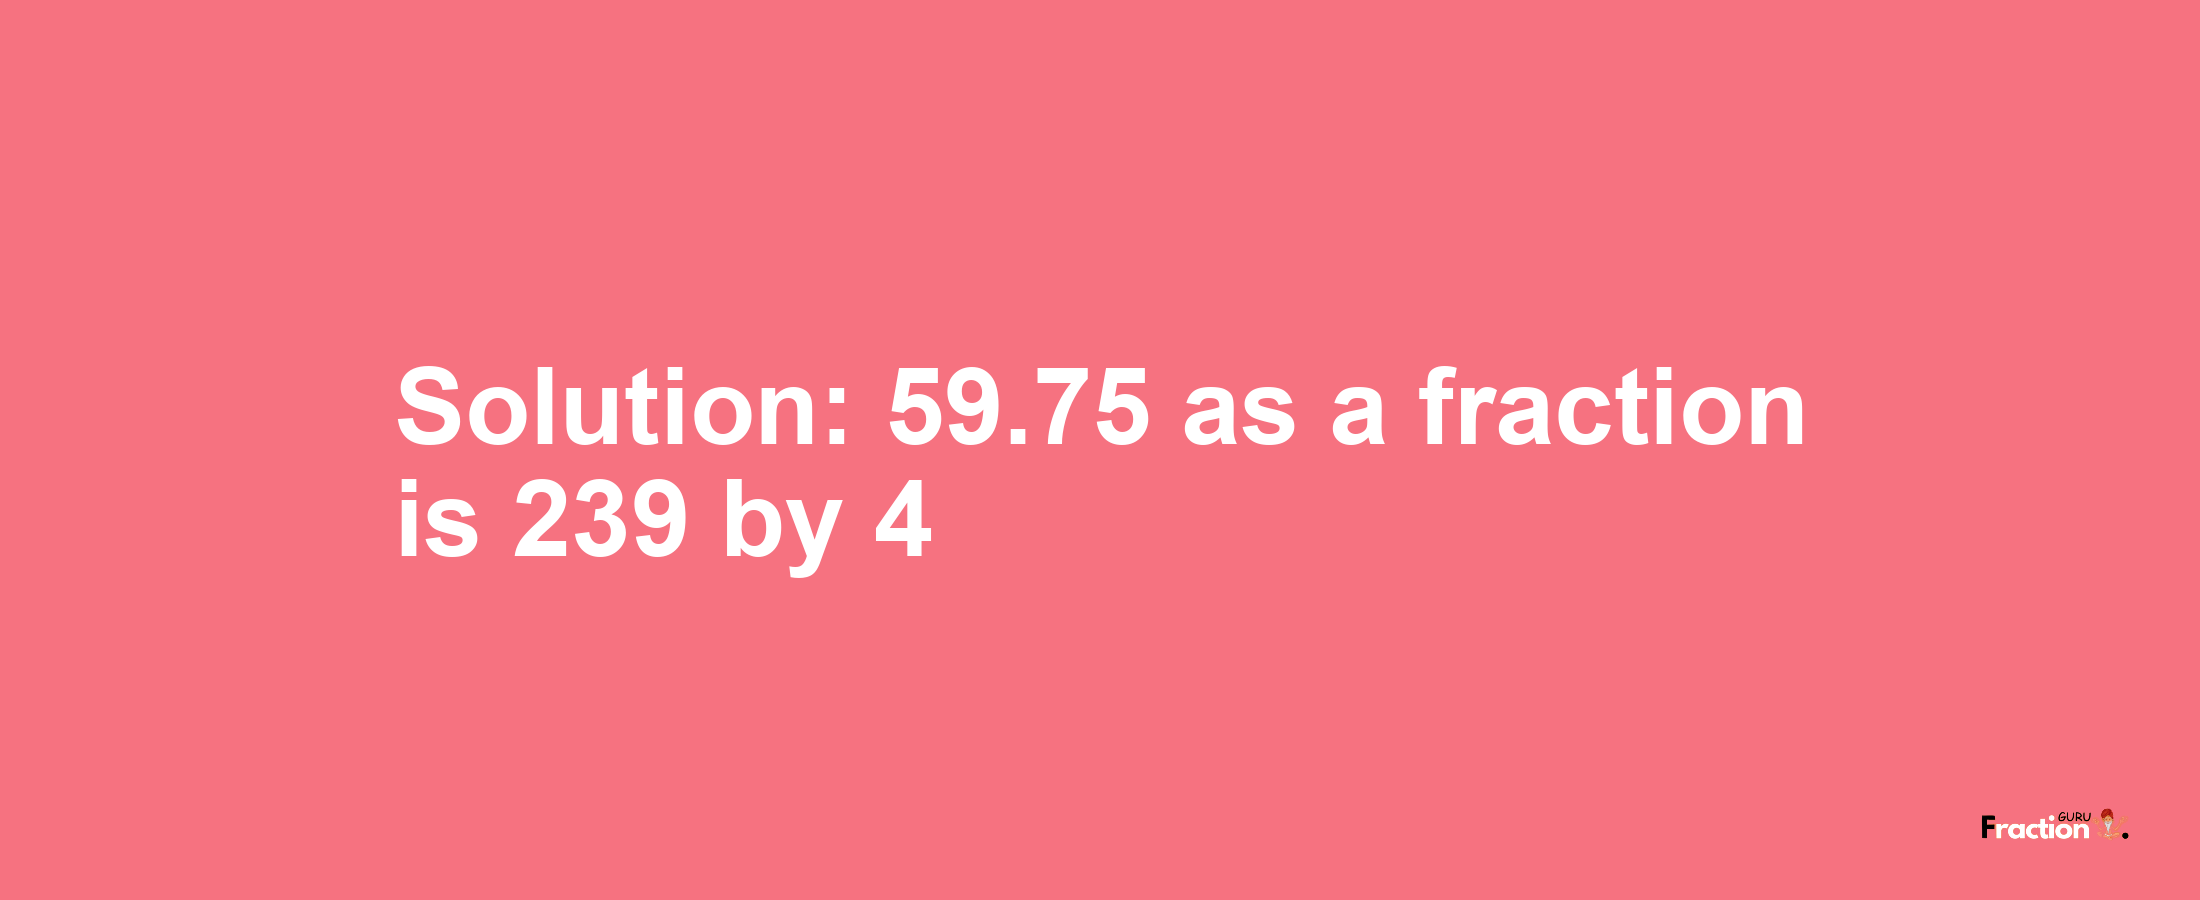 Solution:59.75 as a fraction is 239/4